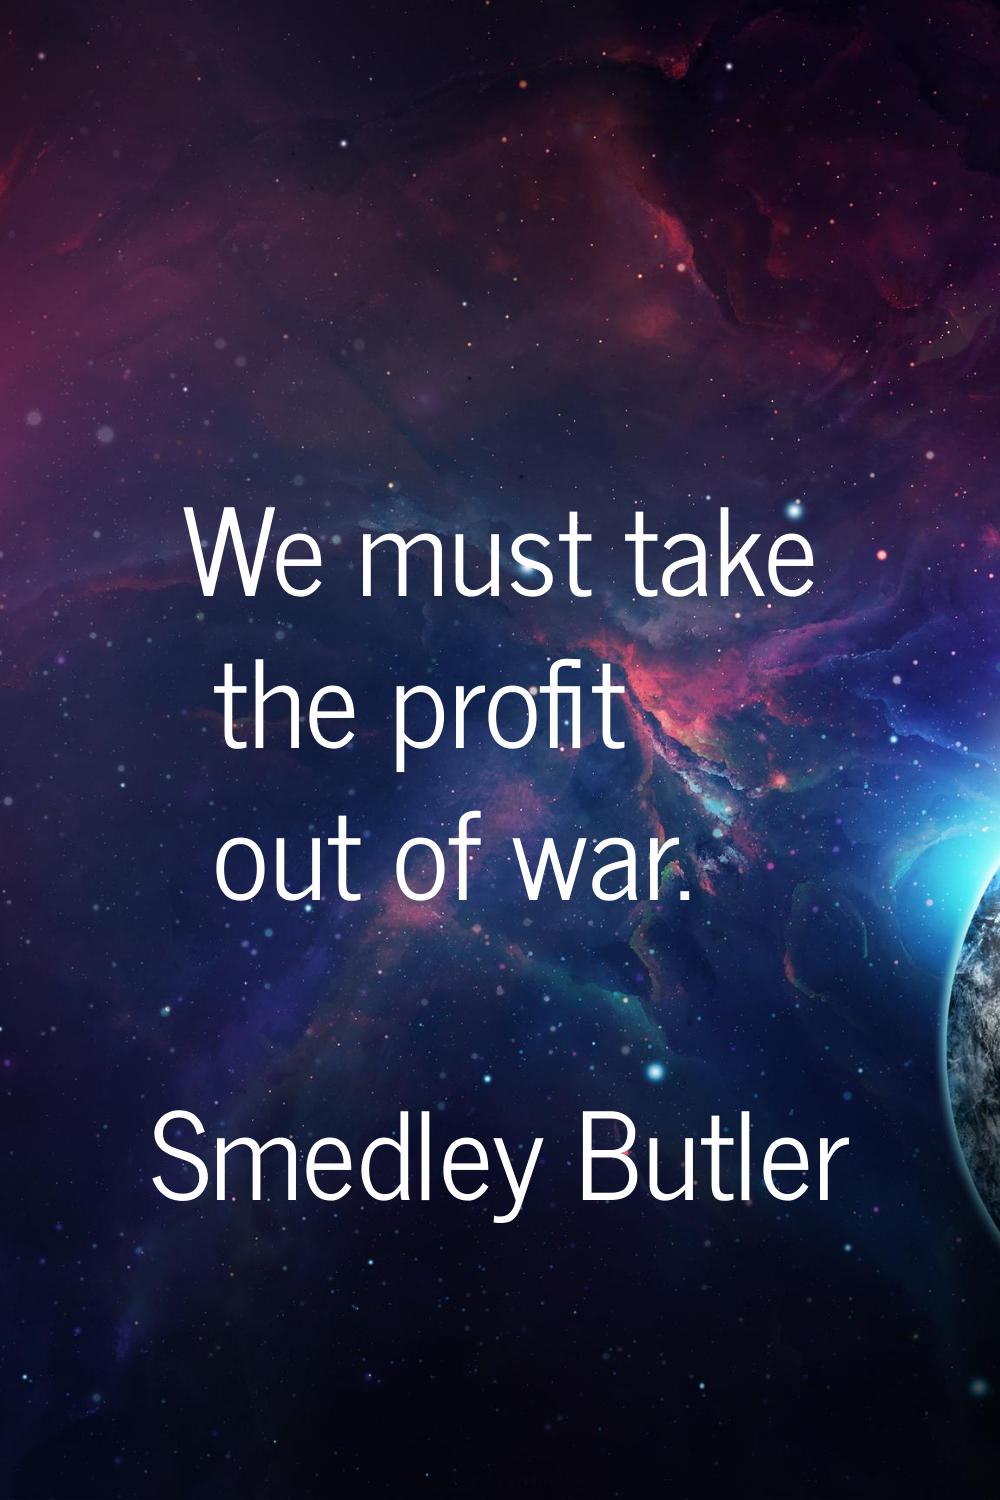 We must take the profit out of war.